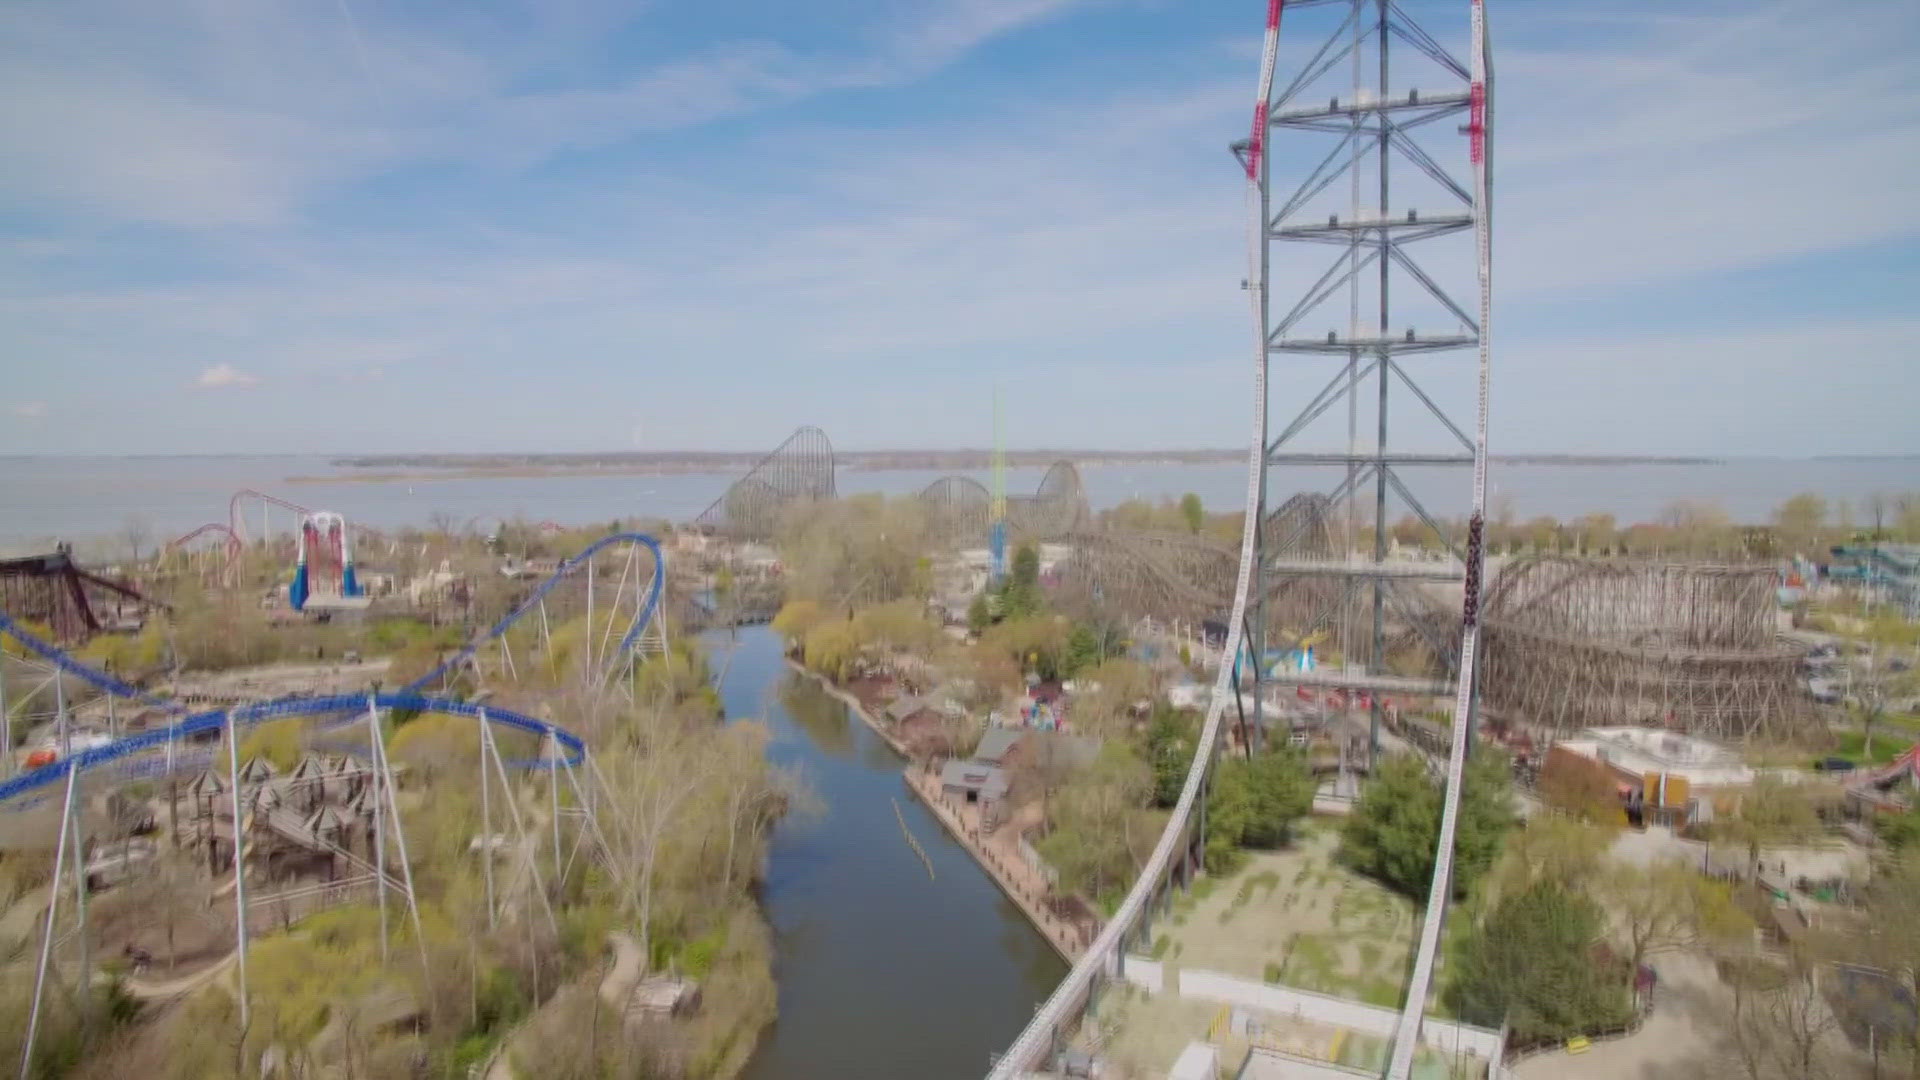 Cedar Point's new Top Thrill 2 roller coaster features a loose-article policy that requires all guests to pass through a metal detector before riding.